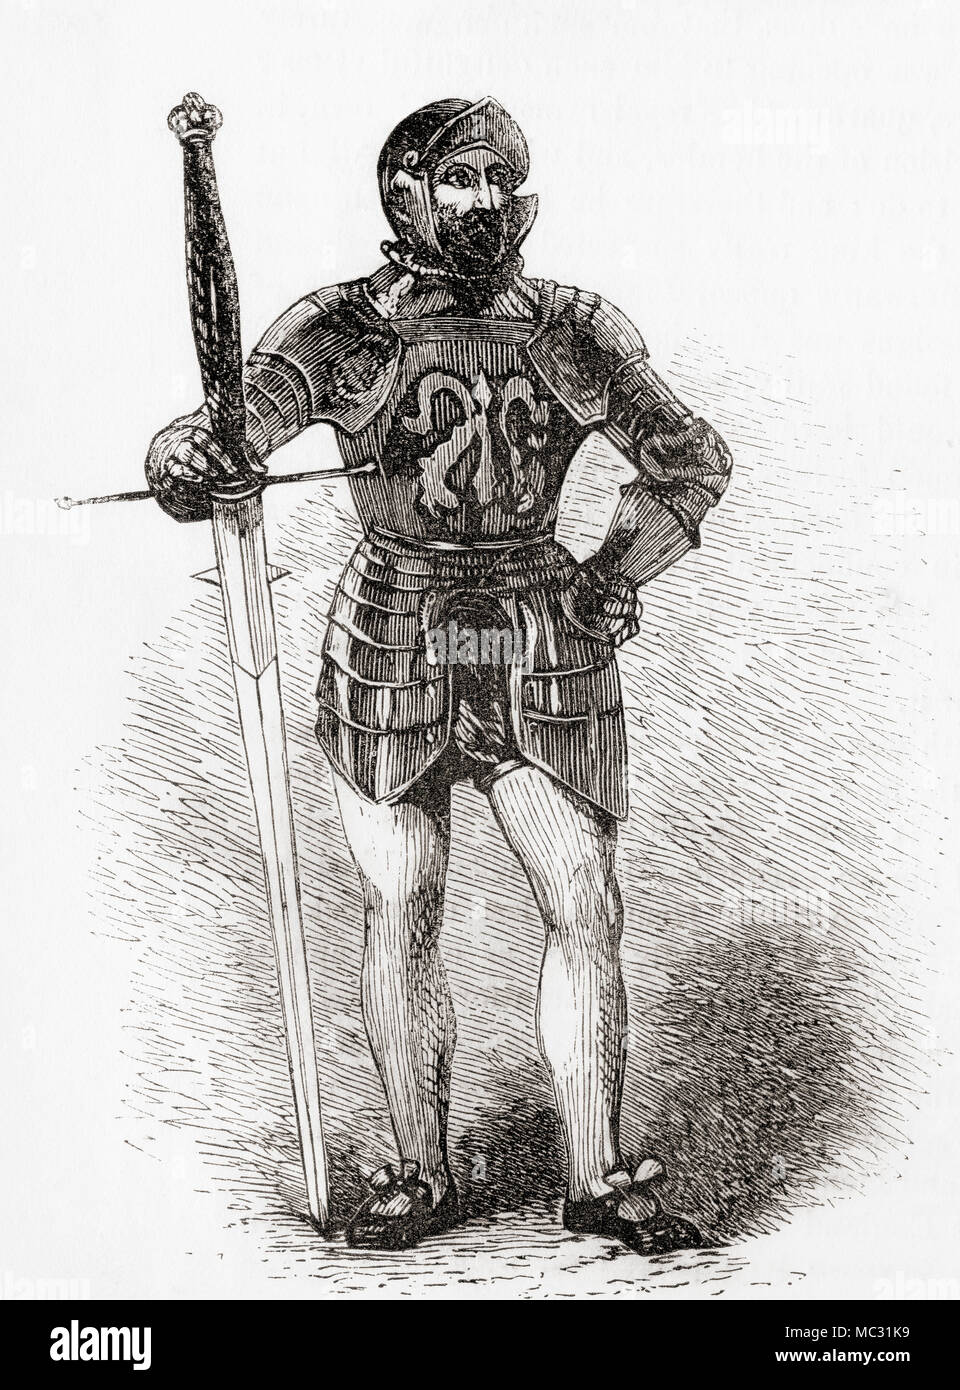 A 16th century foot soldier holding a longsword. From Old England: A ...